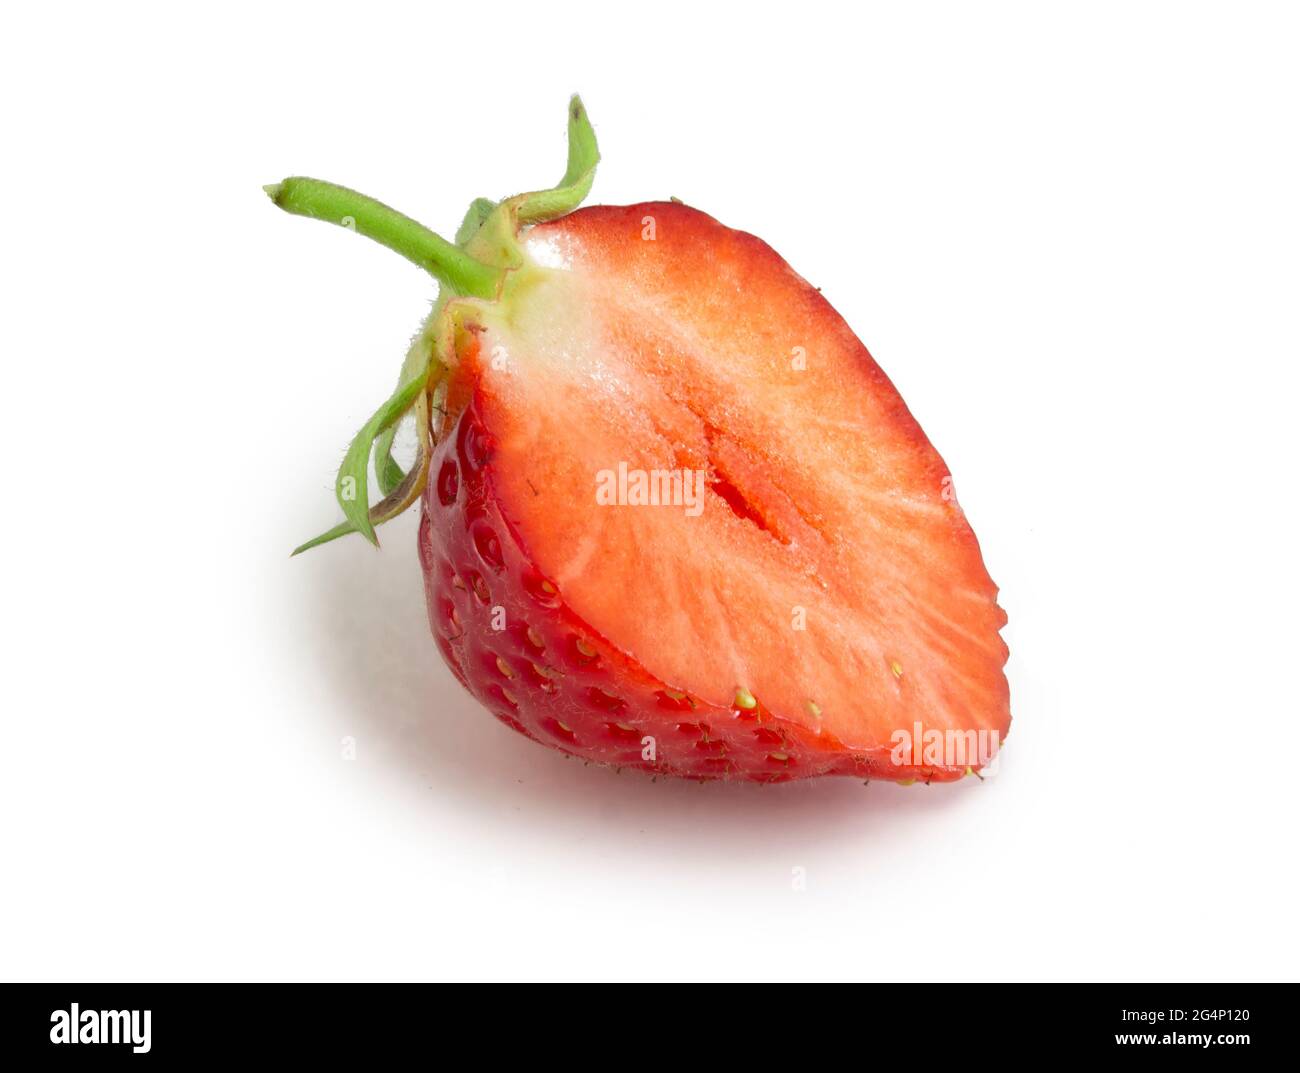 Half of strawberry isolated on white background. Fresh ripe red berry fruit. Stock Photo